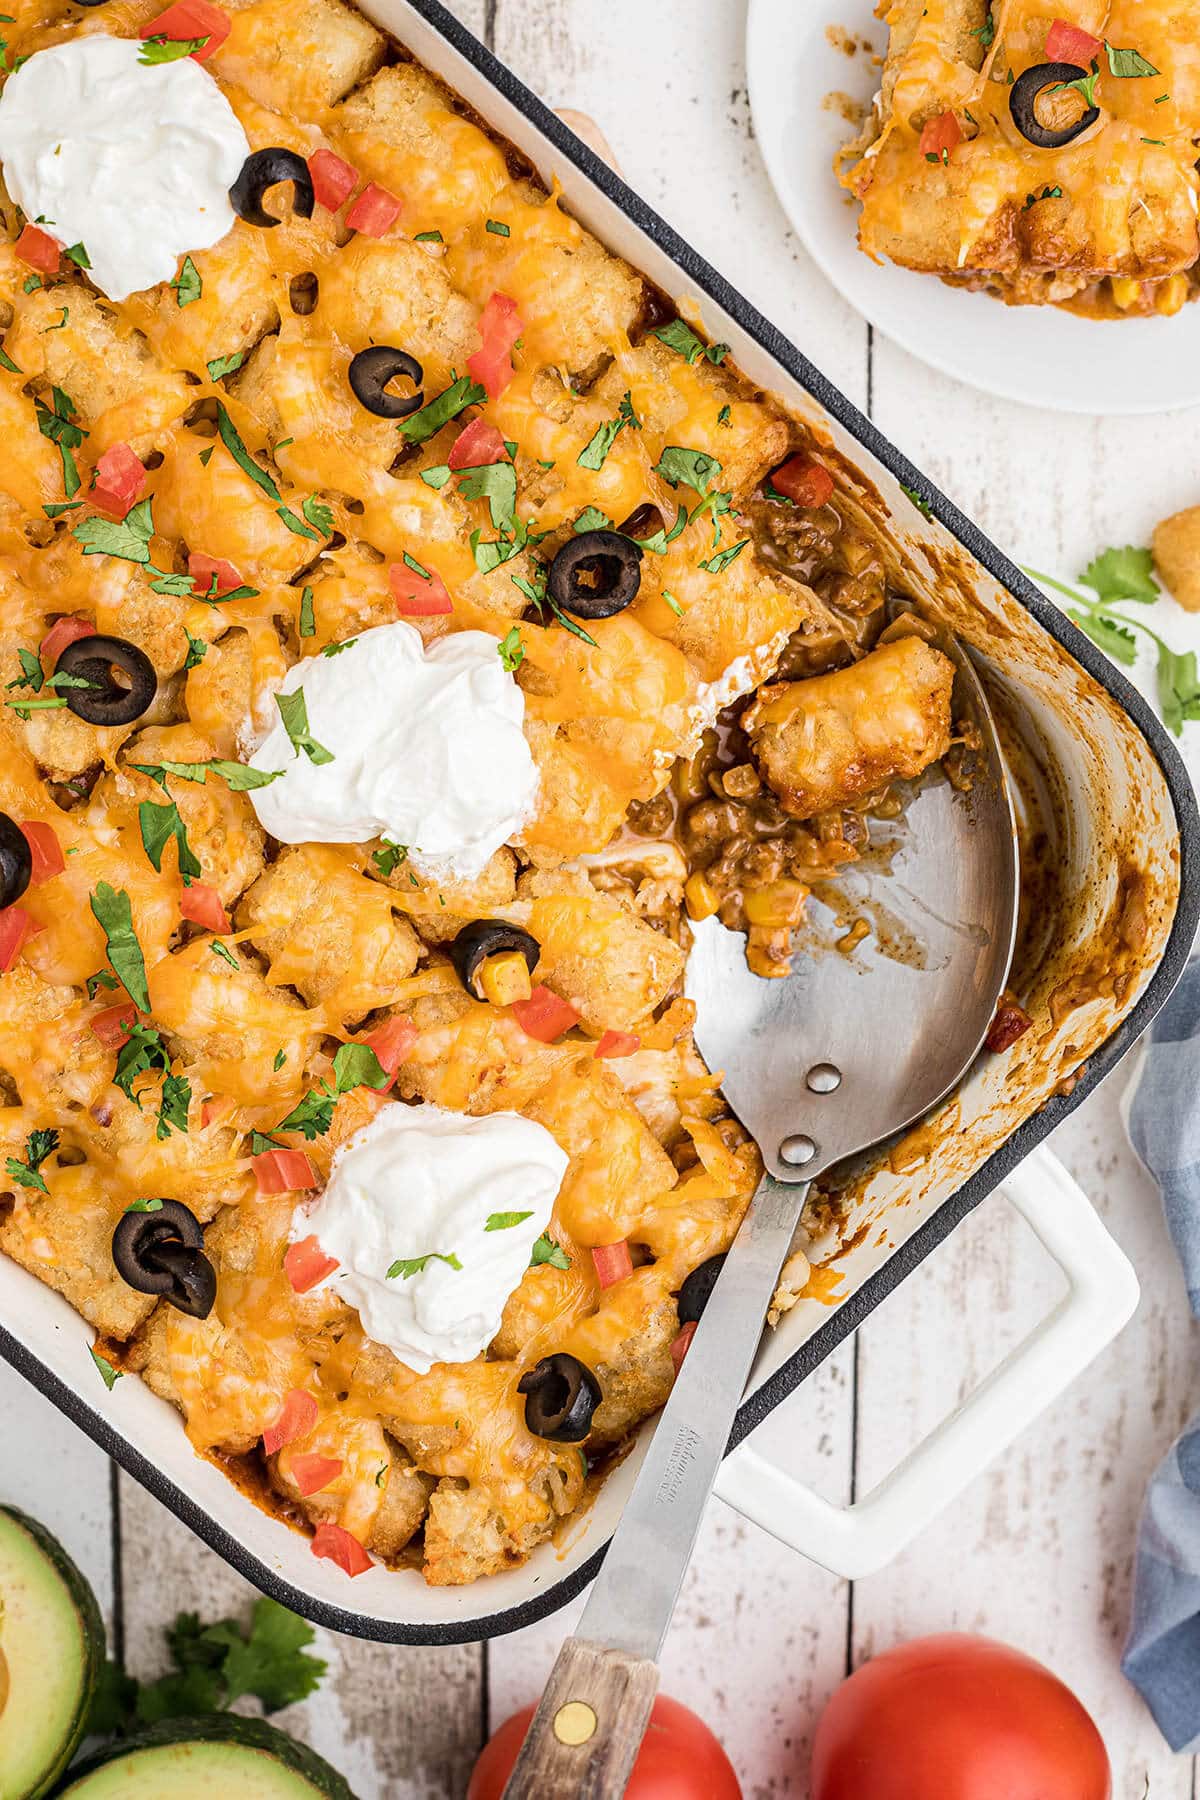 Tater Tot Casserole in baking dish with serving spoon.